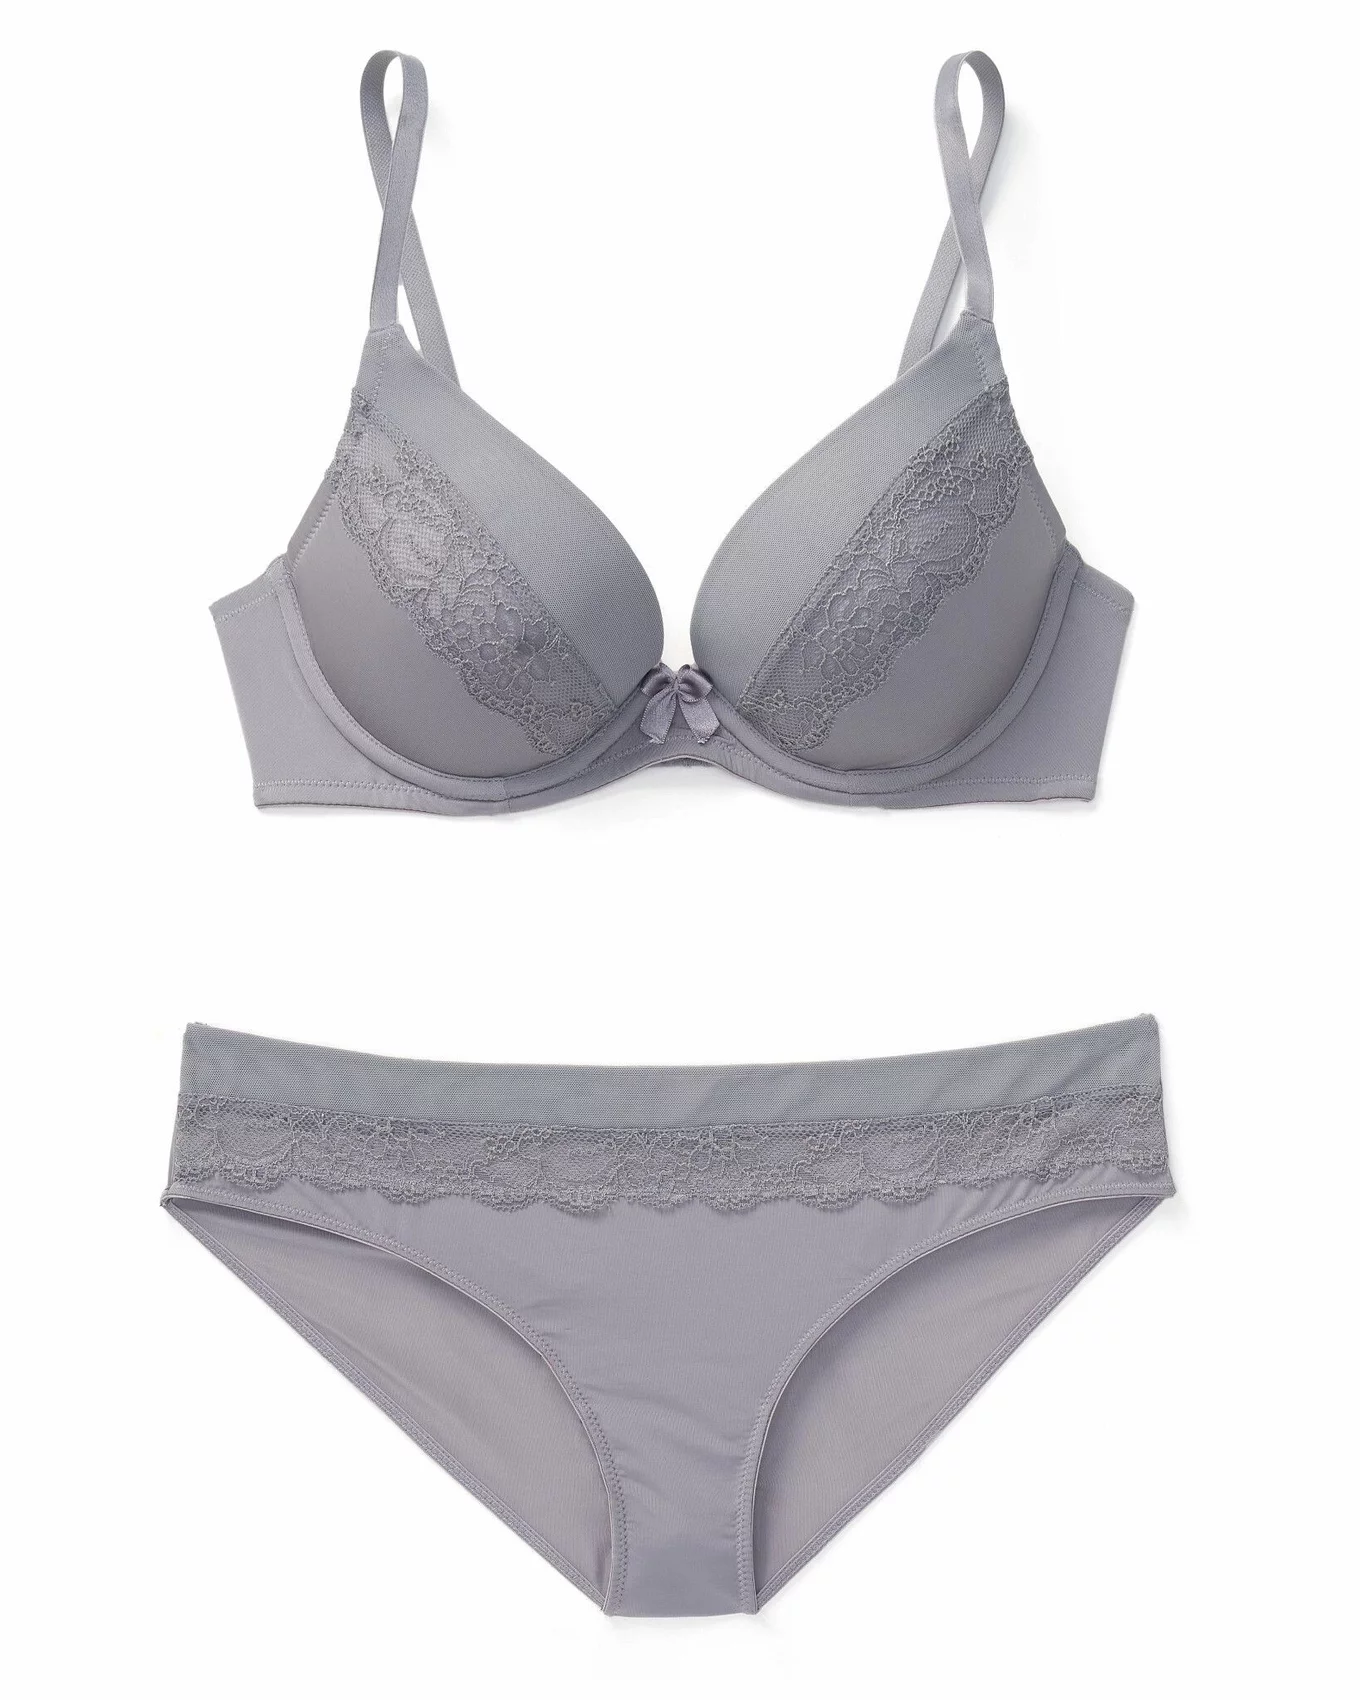 Adore Me Jana Pushup, Excalibur Grey with Lace Detail. Size 32DDD/F